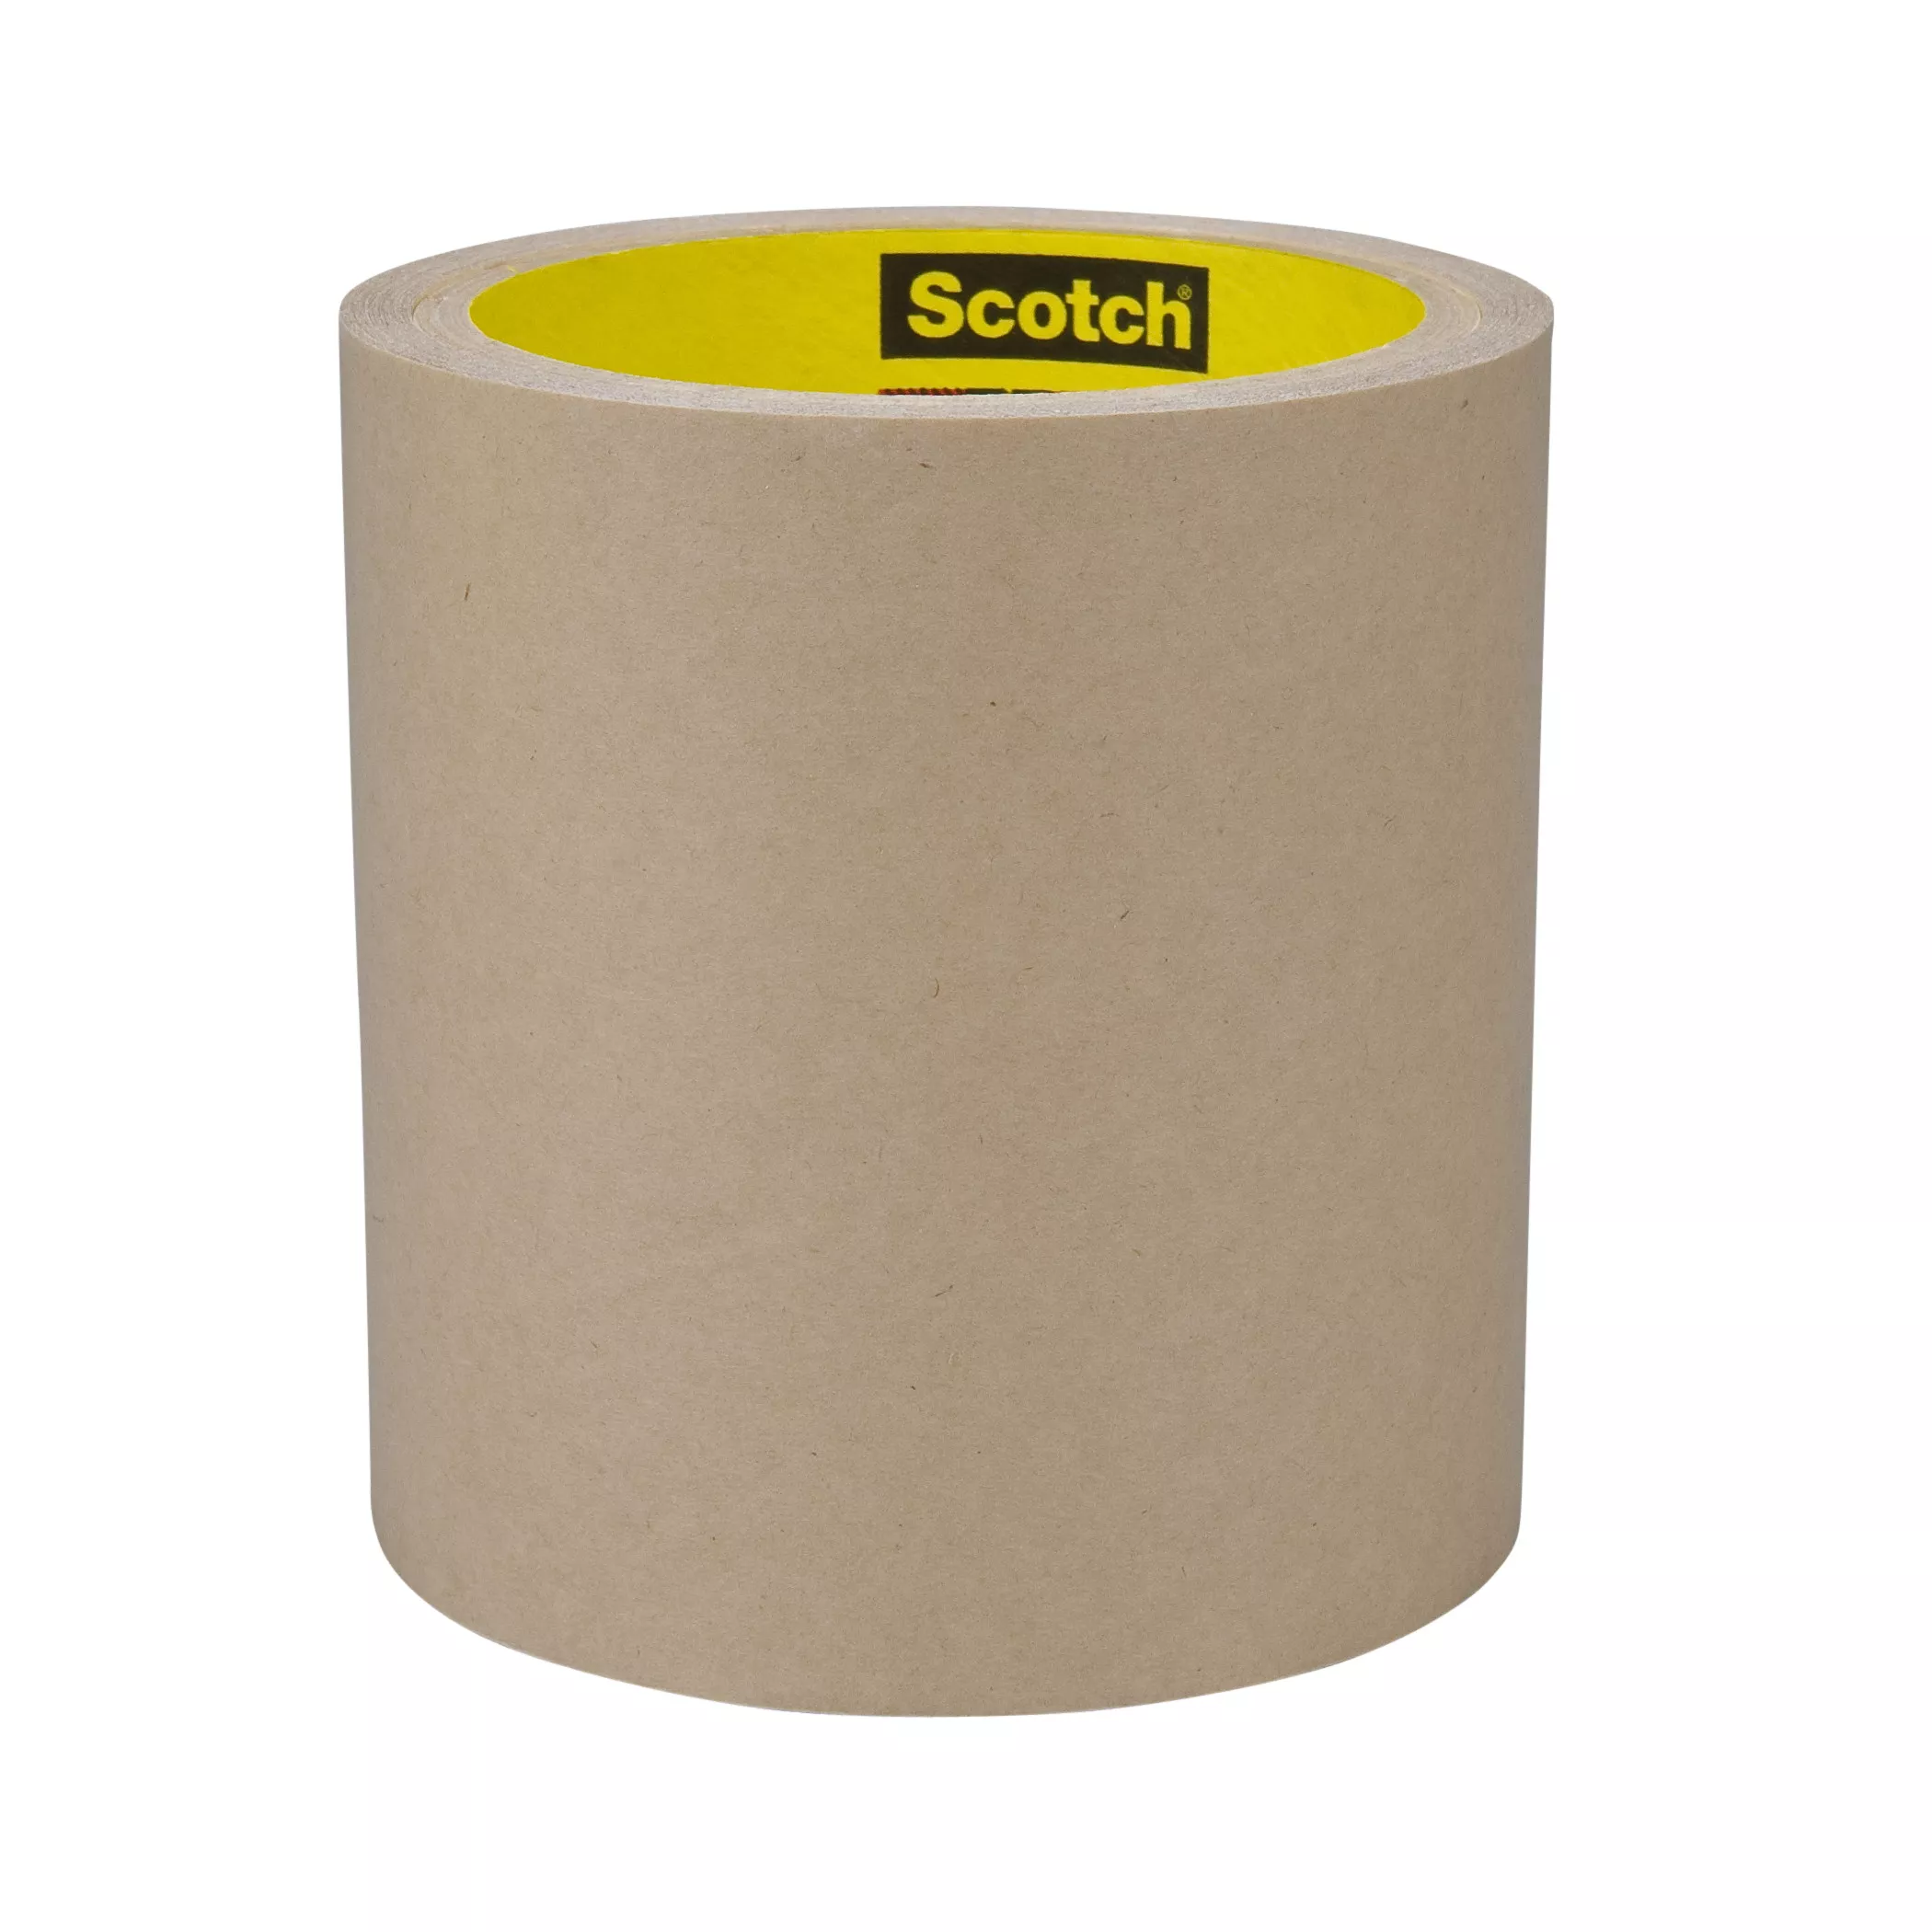 3M™ Adhesive Transfer Tape 9482PC, Clear, 3/4 in x 180 yd, 2 mil, 12
Roll/Case